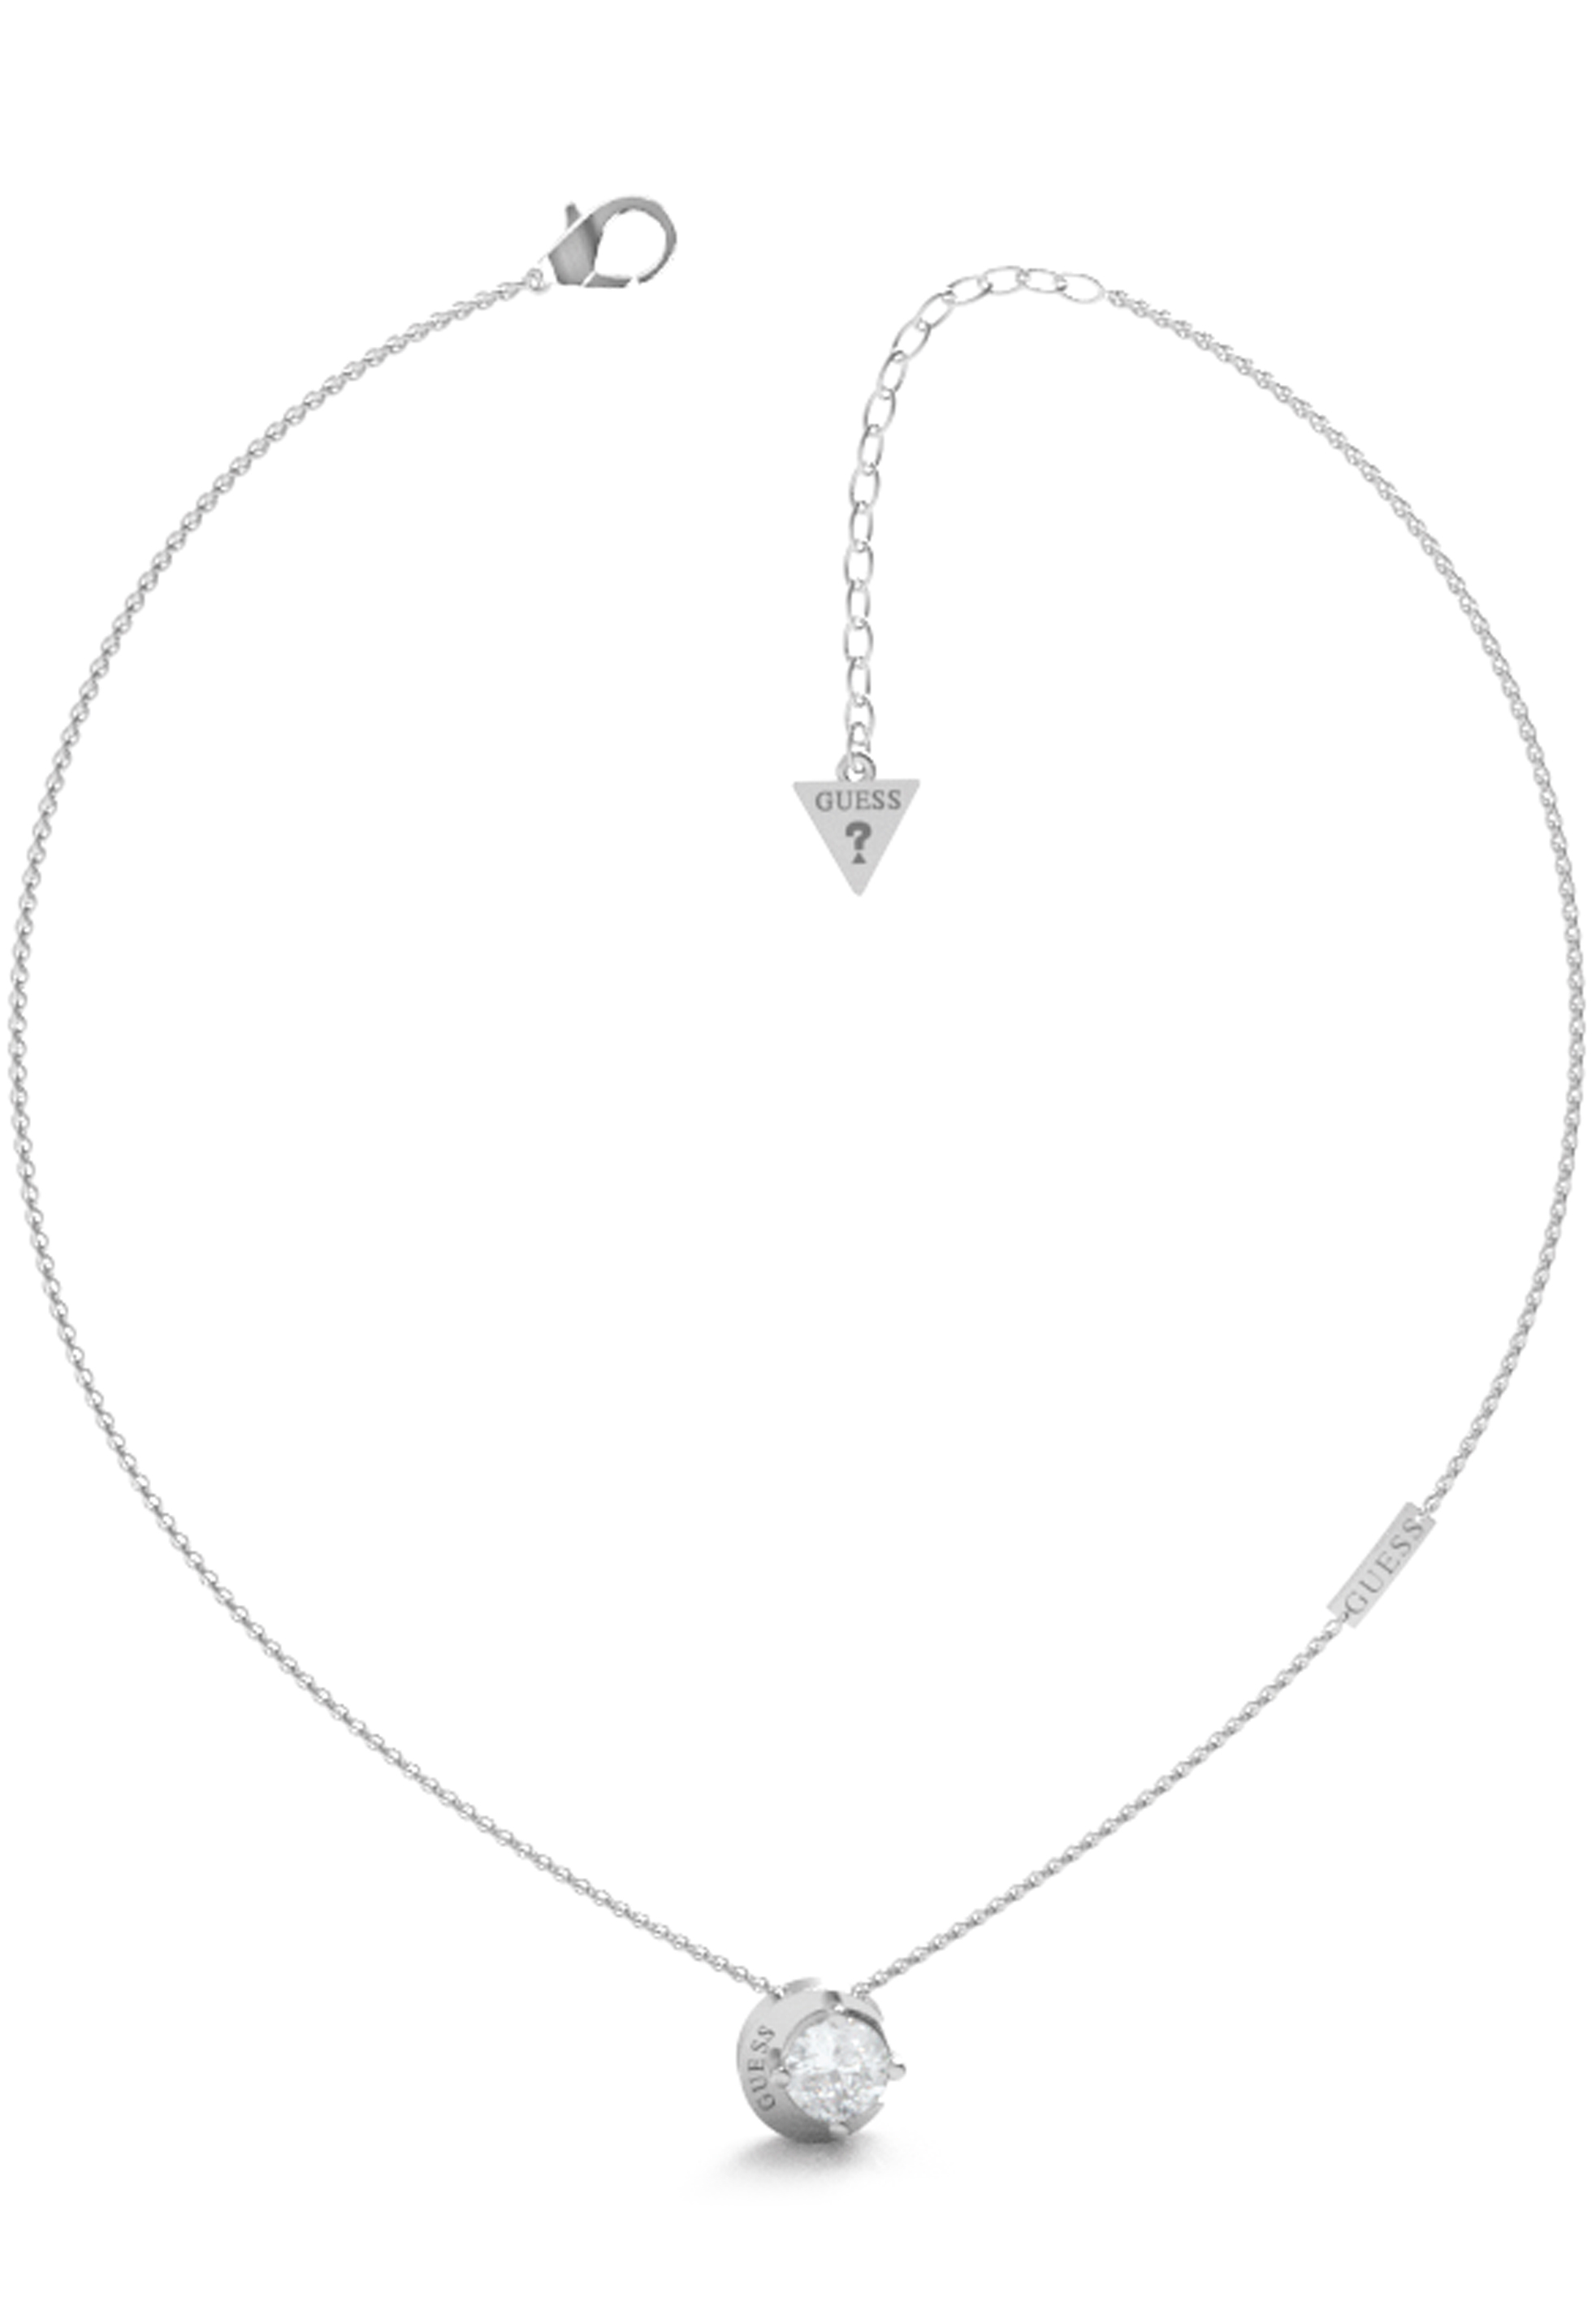 Guess Moon Phases Silver & Crystal Necklace UBN01190RH